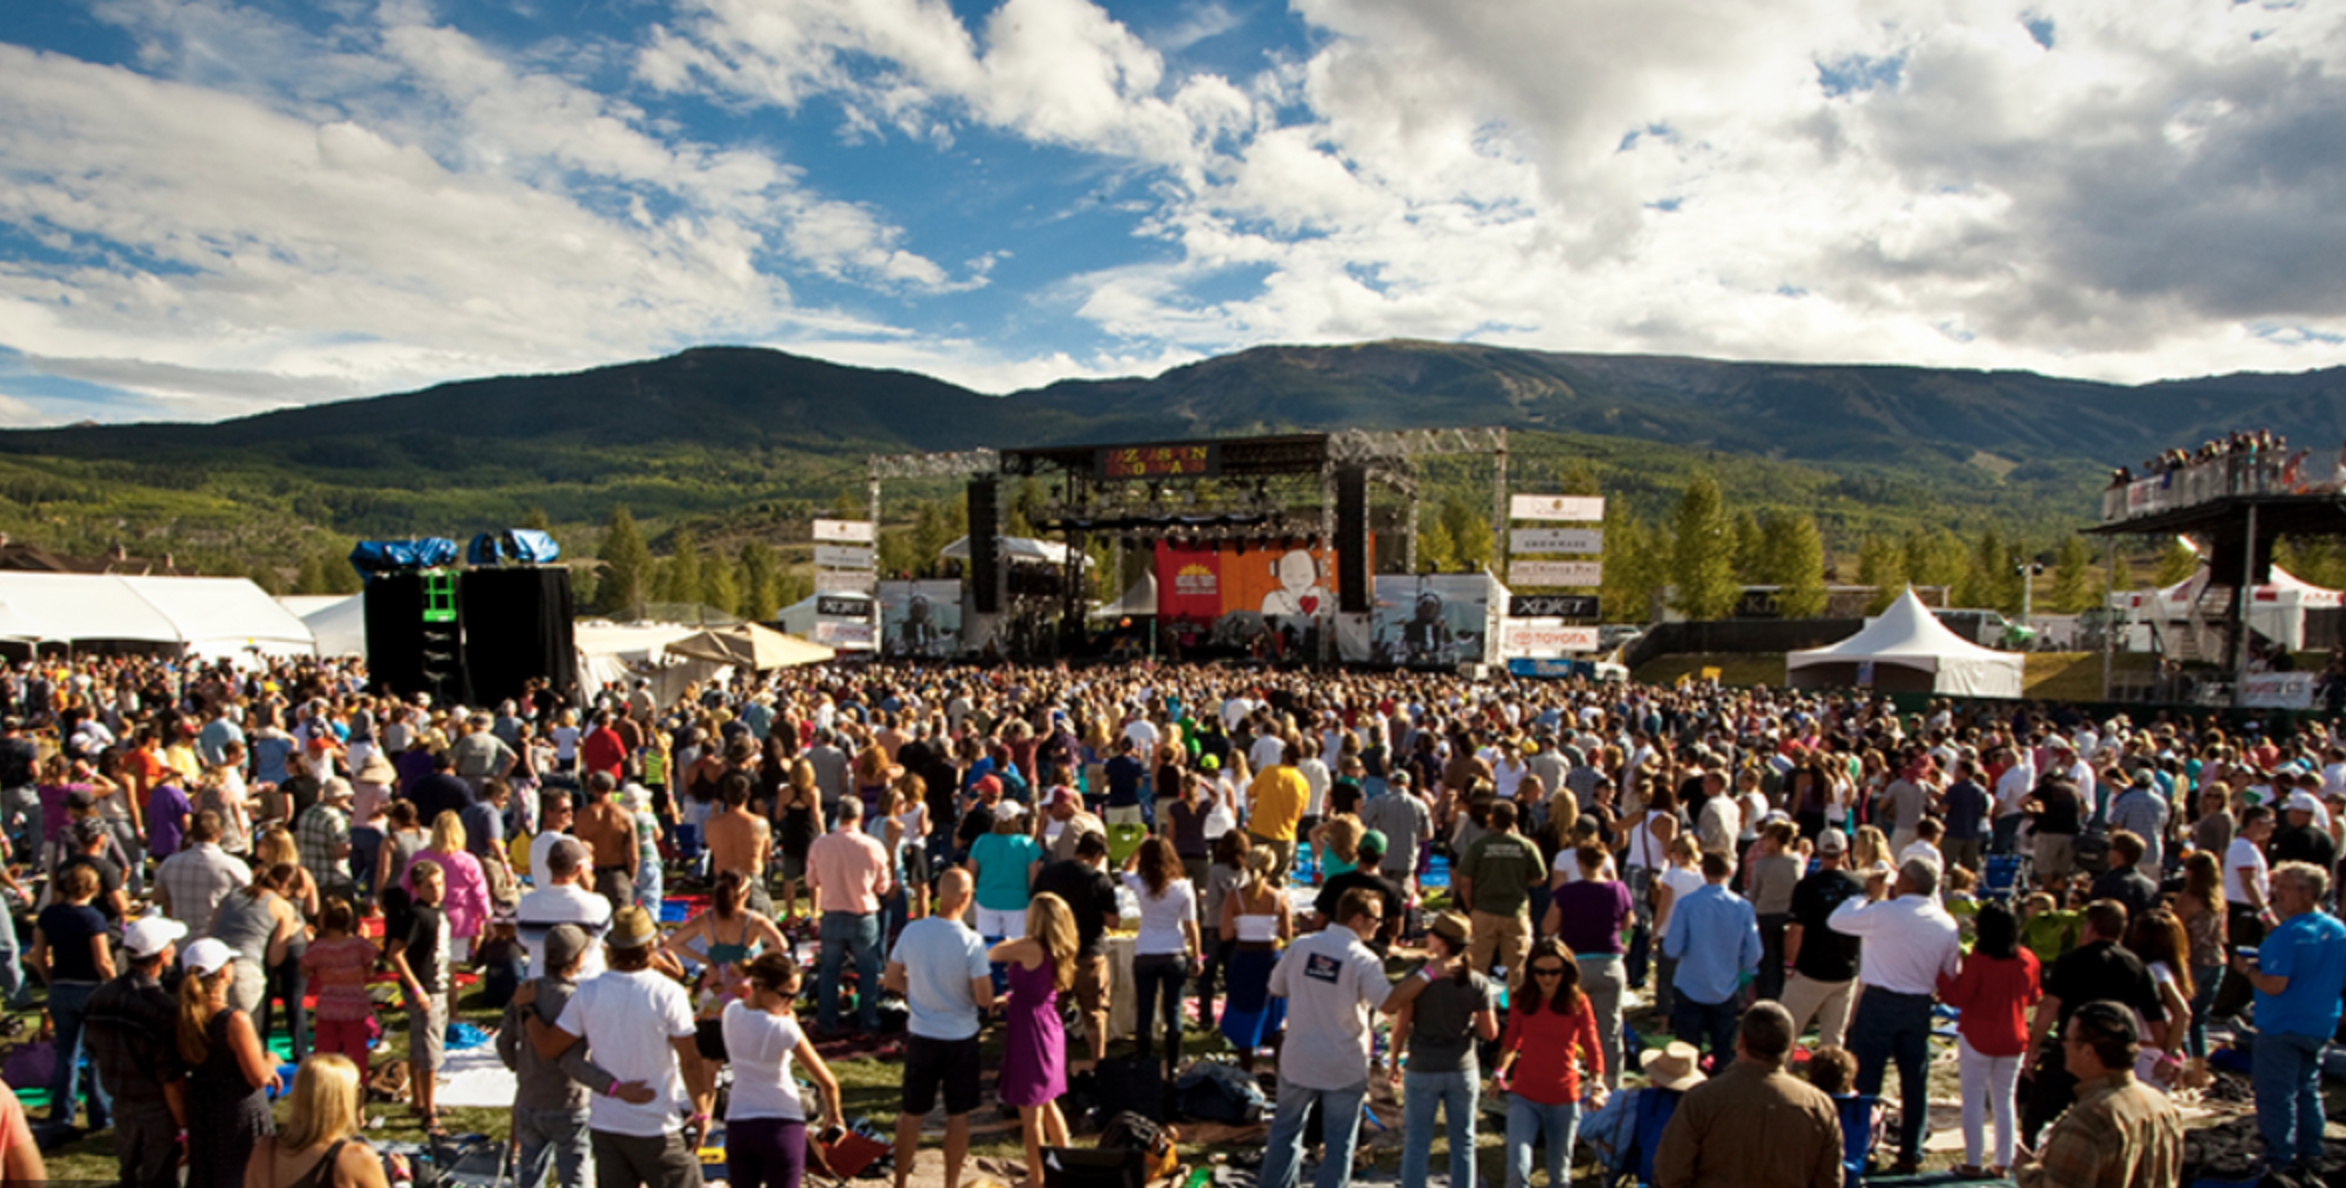 Snowmass Village Discusses CBD Sponsorships At JAS Labor Day Experience